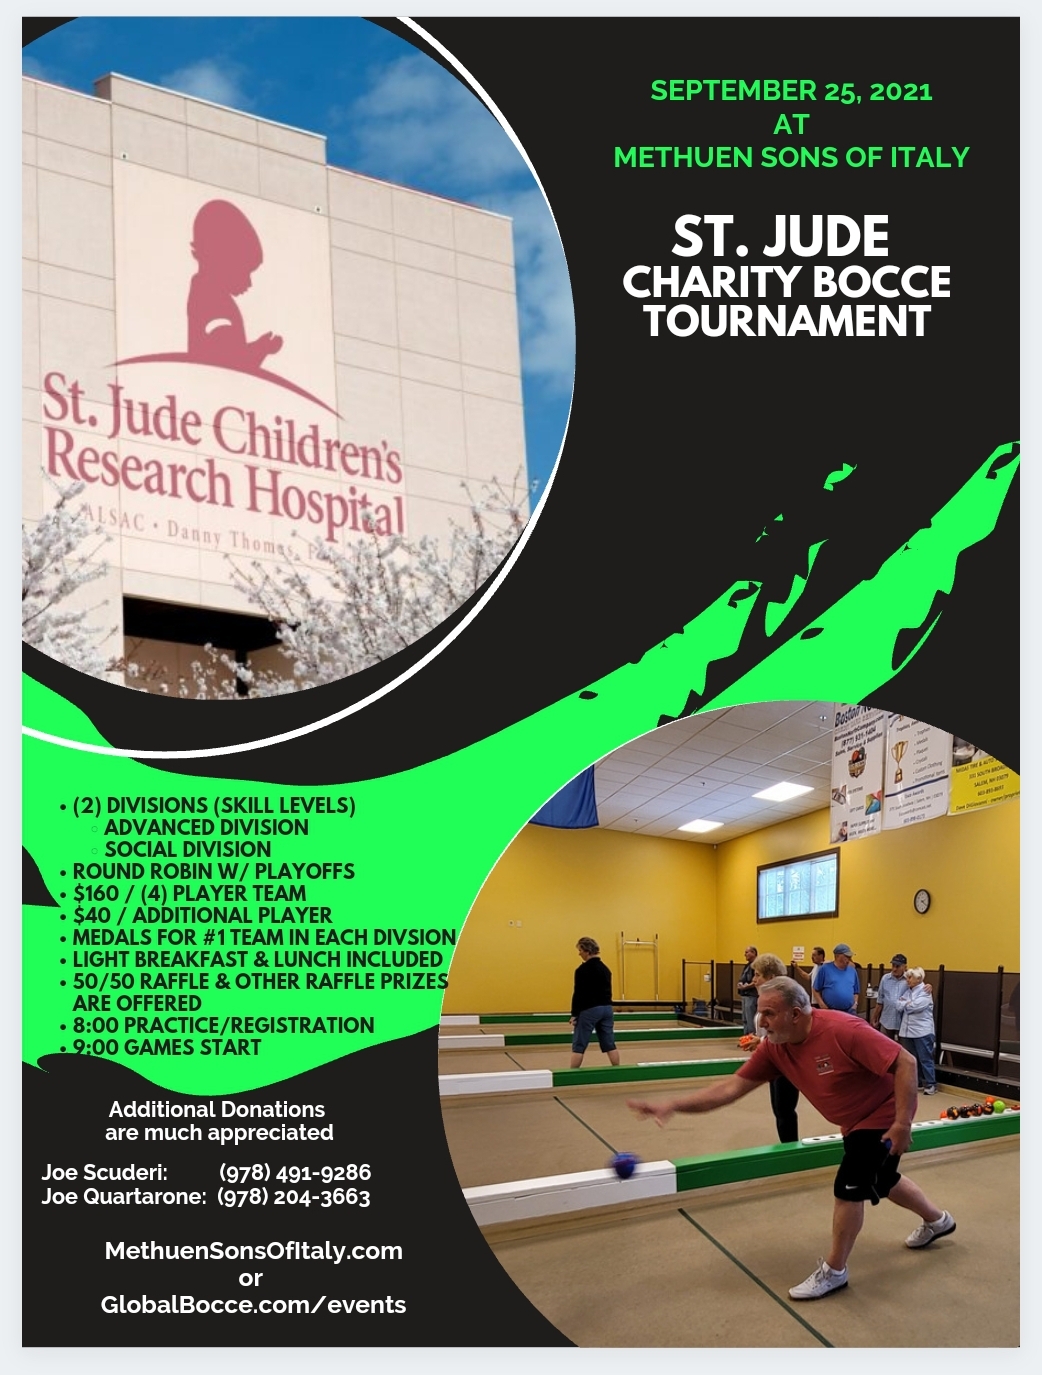 Bocce, Bocceball, Bocce Tournament, Bocce Tournaments, Boston, Methuen, Sons of Italy, Massachusetts, MA, MA Bocce, Massachusetts Bocce, Boston Bocce, Methuen Sons of Italy, USA Bocce, US Bocce, Northeast Bocce, Midwest Bocce, East Coast Bocce, Global Bocce, Joe Bocce, Recreational Sports, Bocce Court, Bocce Courts, Charity, Fundraiser, Childhood Cancer, Cancer, Cure Cancer, St. Jude, St. Jude Hospital, St. Jude Children's Hospital